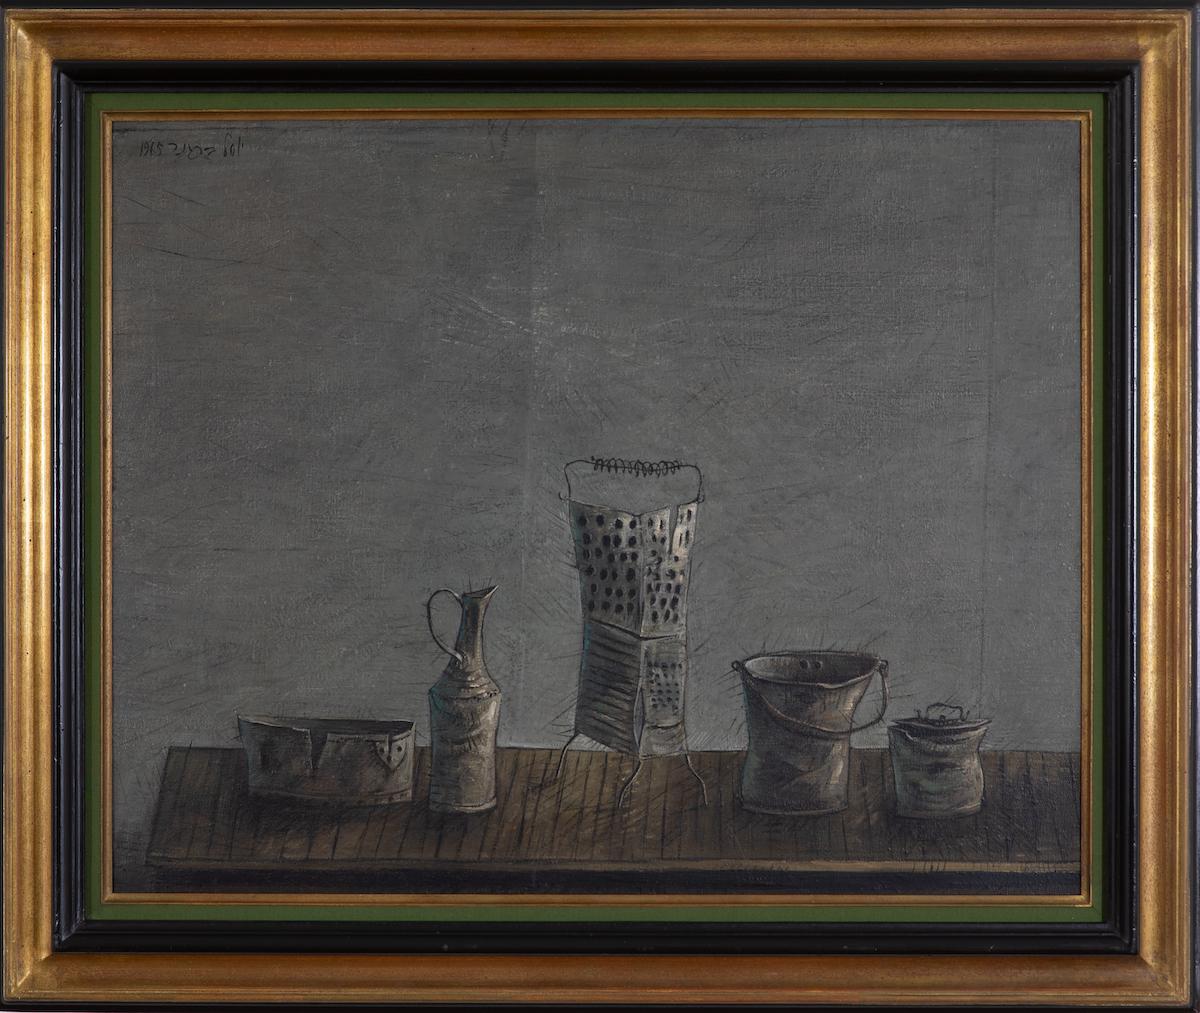 Vessels by Yosl Bergner - Still life painting, 1965 For Sale 2